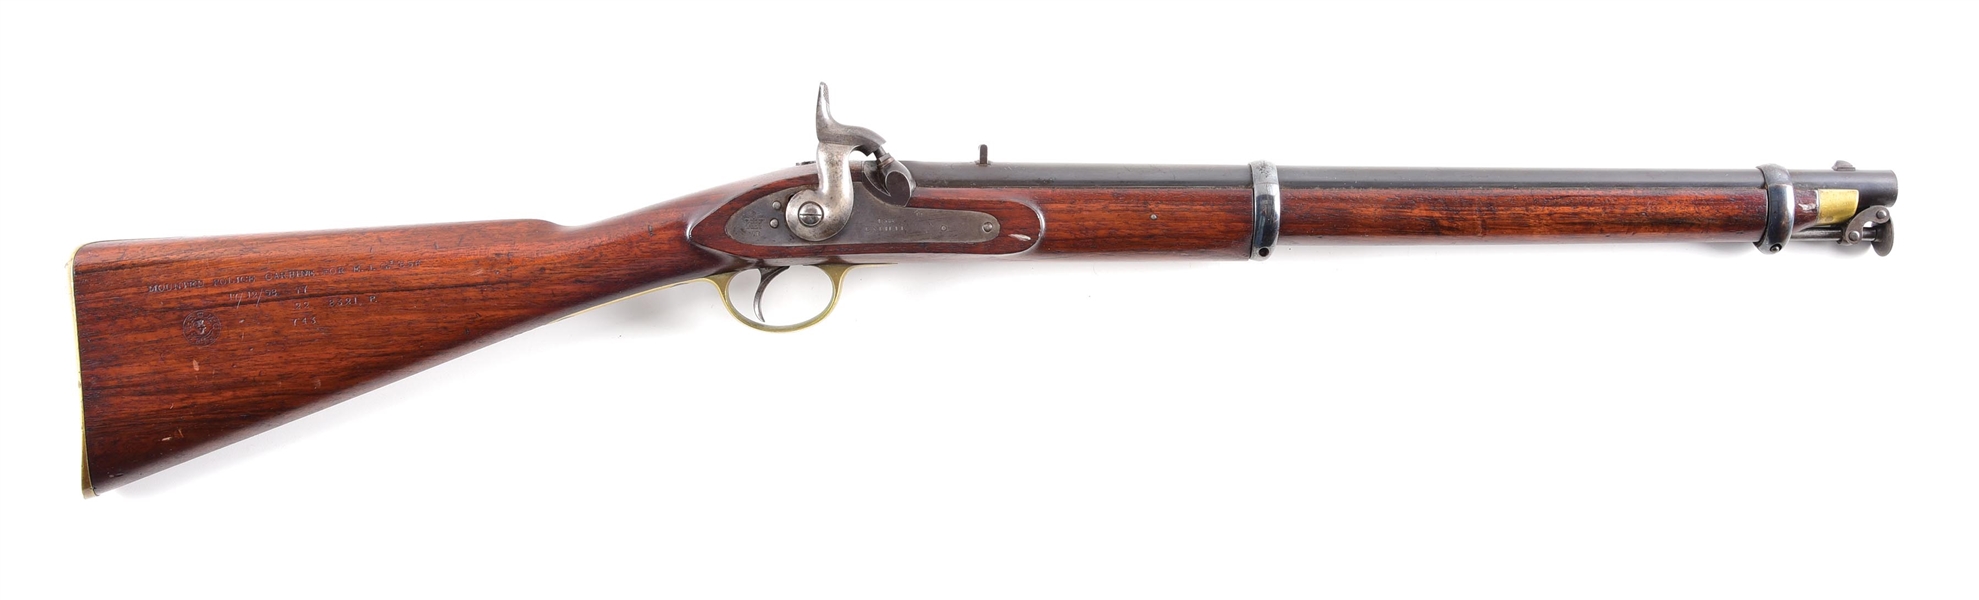 (A) PATTERN EXAMPLE OF AN ENFIELD PATTERN 1858 MOUNTED POLICE CARBINE FOR EAST INDIAN GOVERNMENT SERVICE.